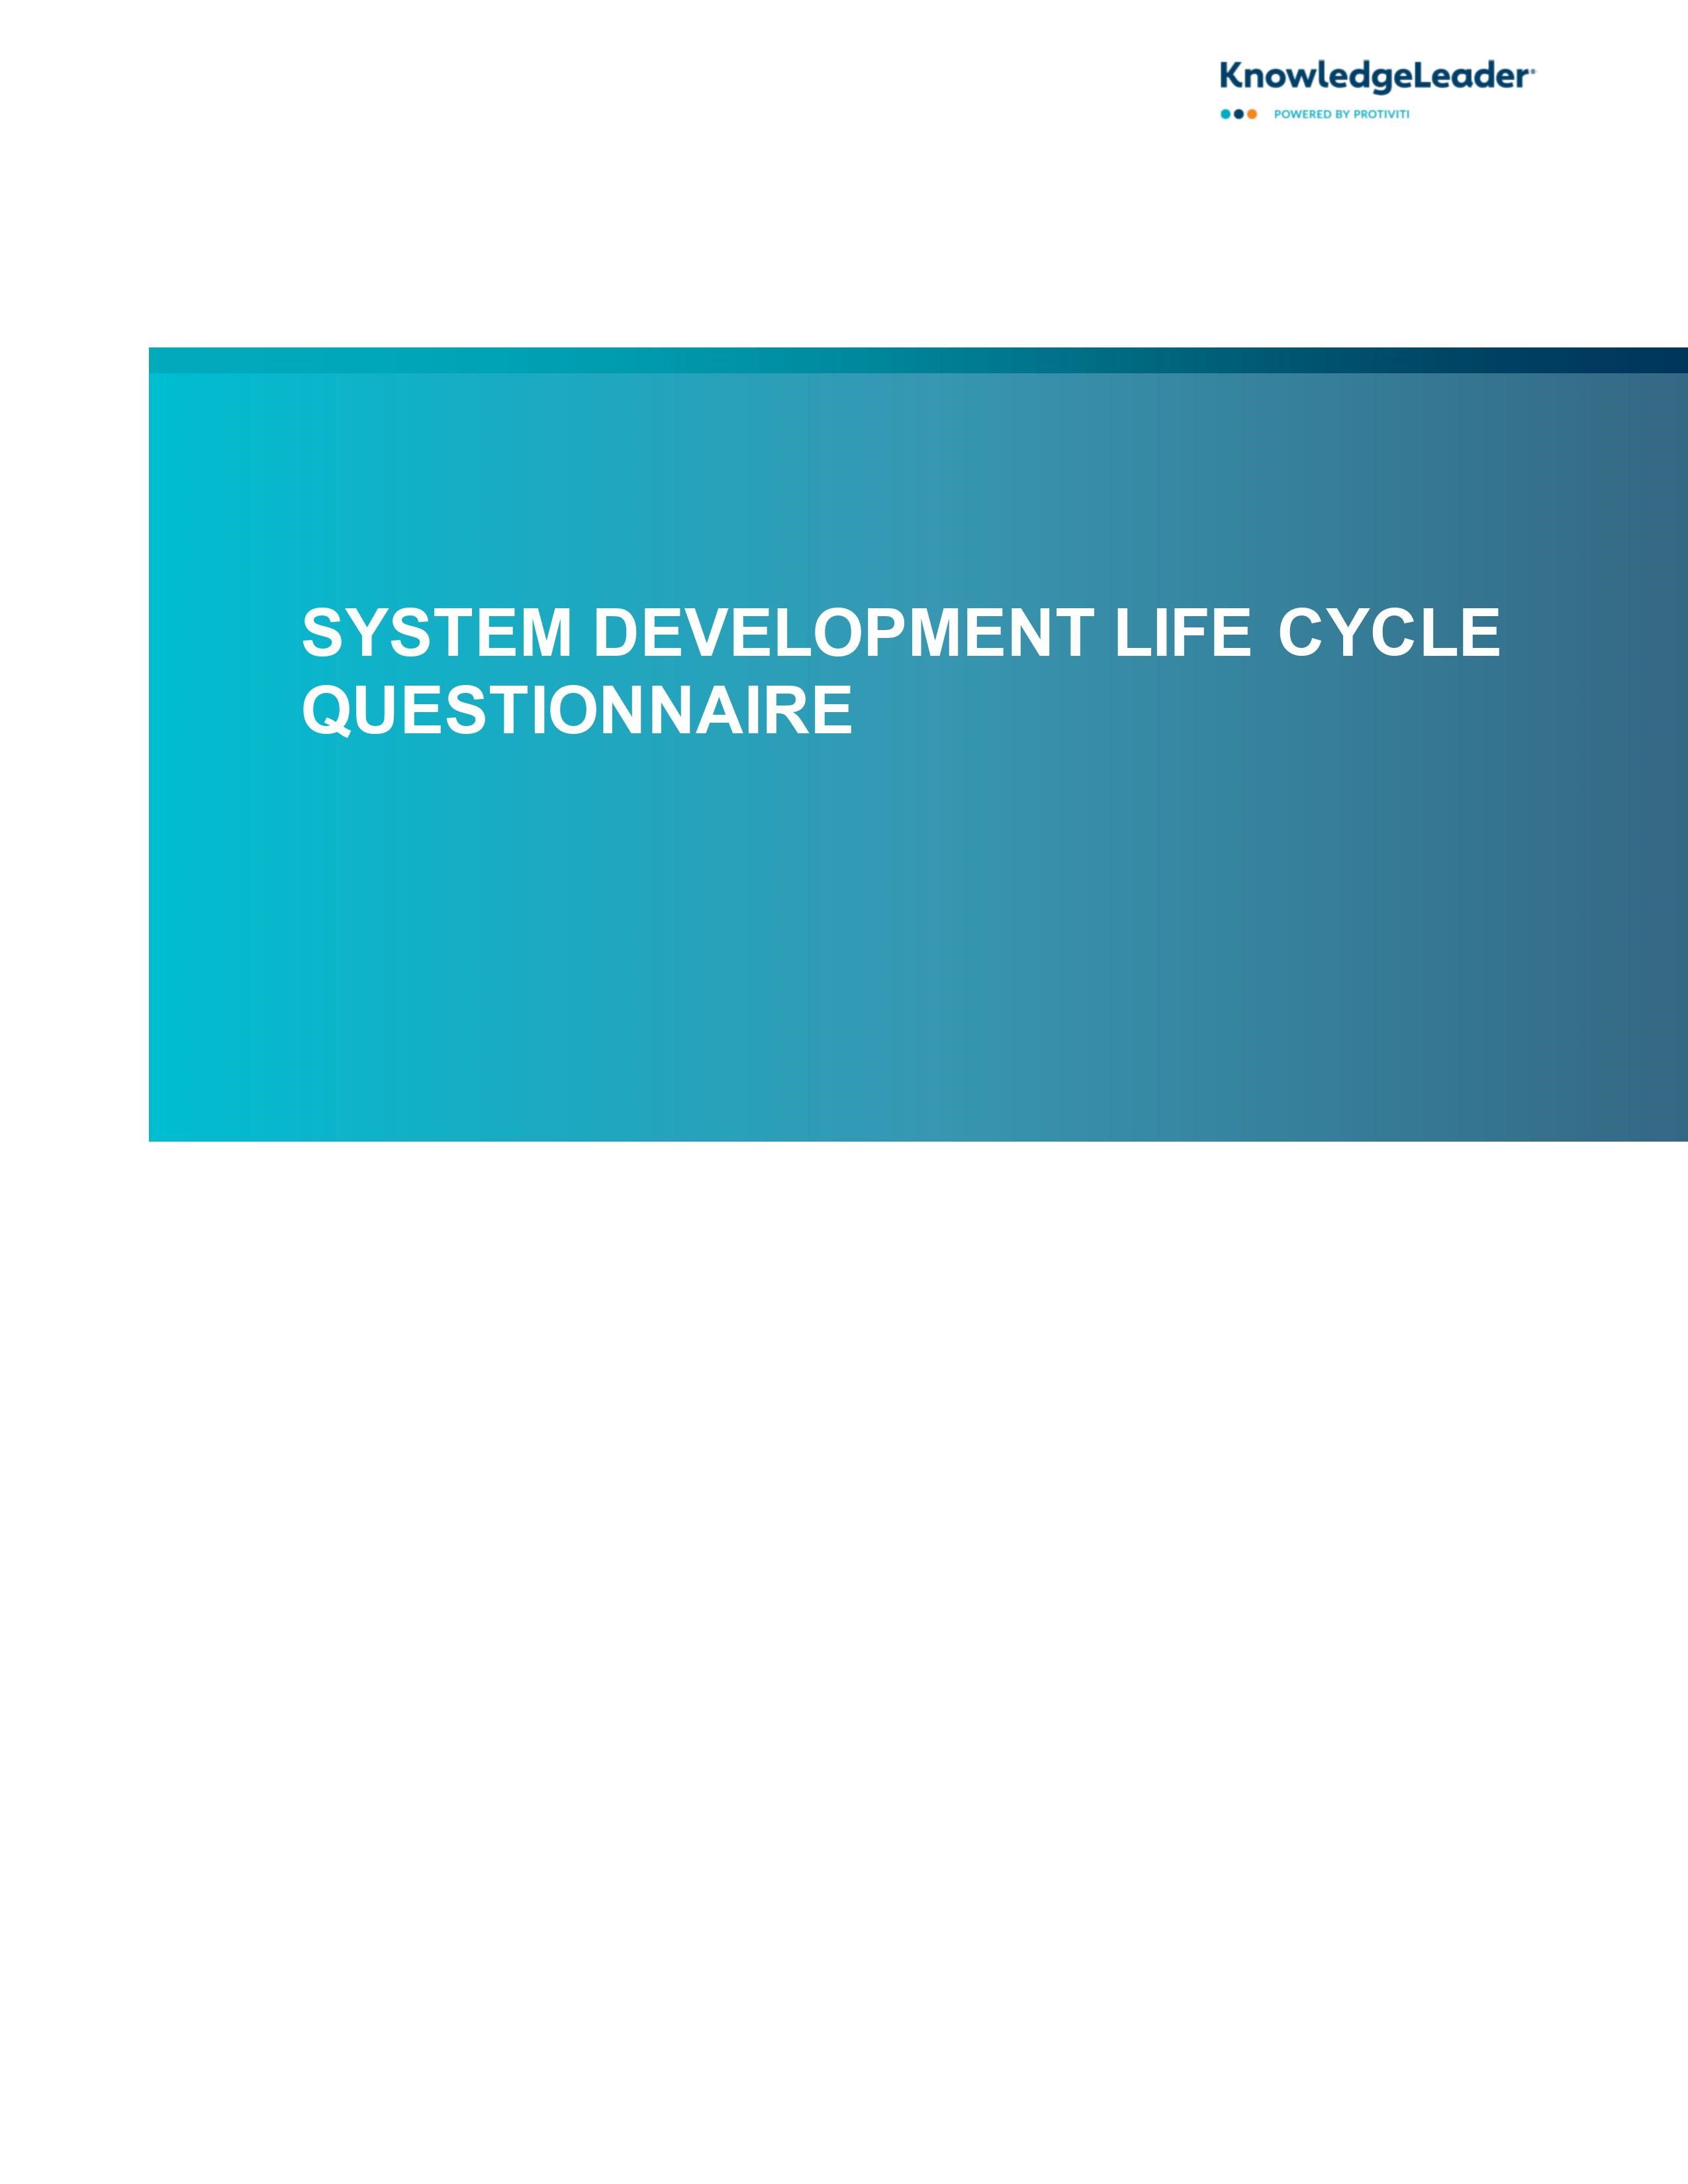 screenshot of the first page of the System Development Life Cycle Questionnaire